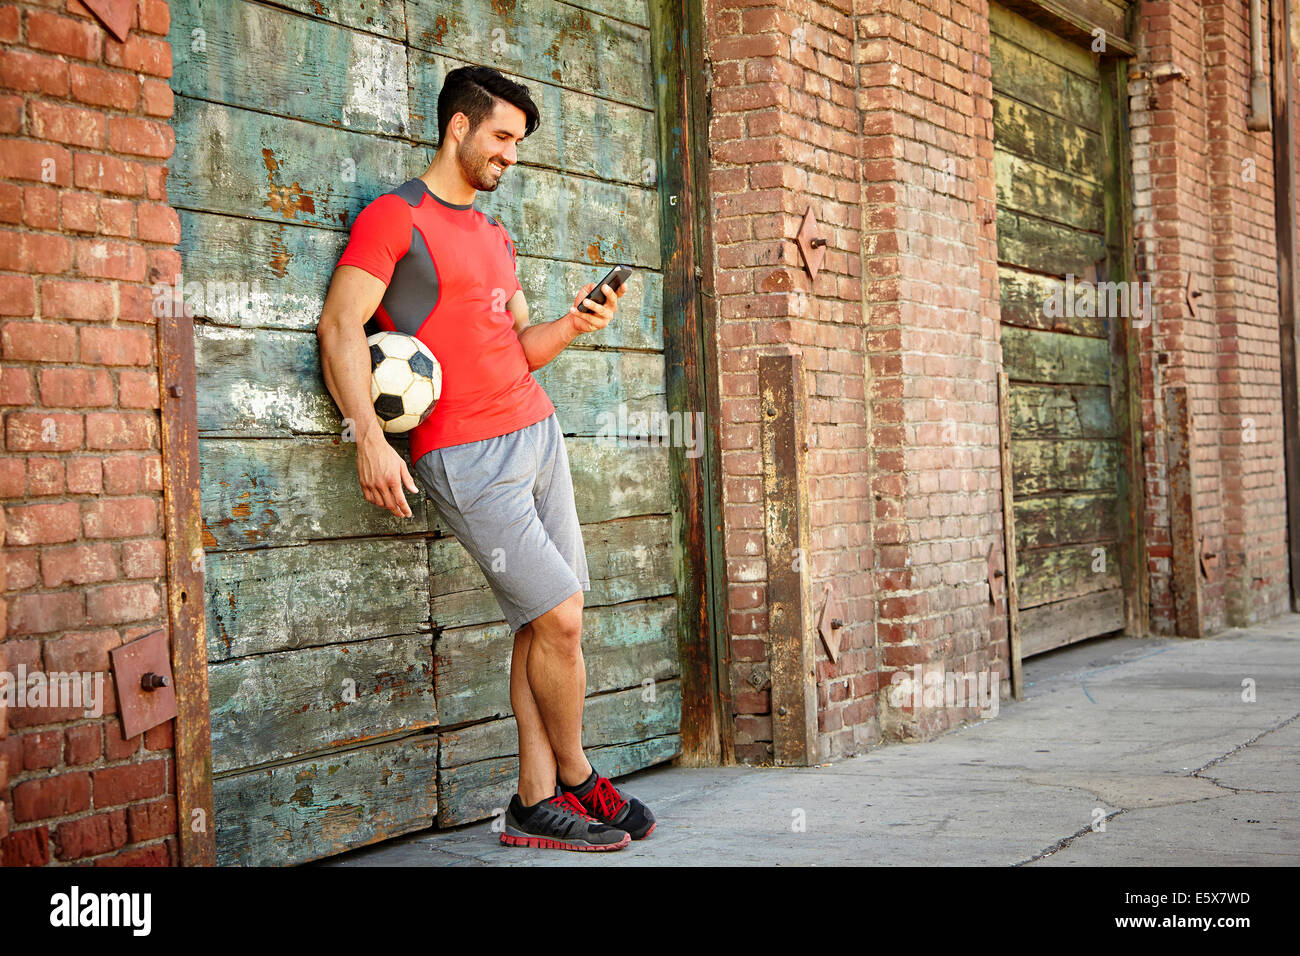 Young male soccer player texting on smartphone Banque D'Images